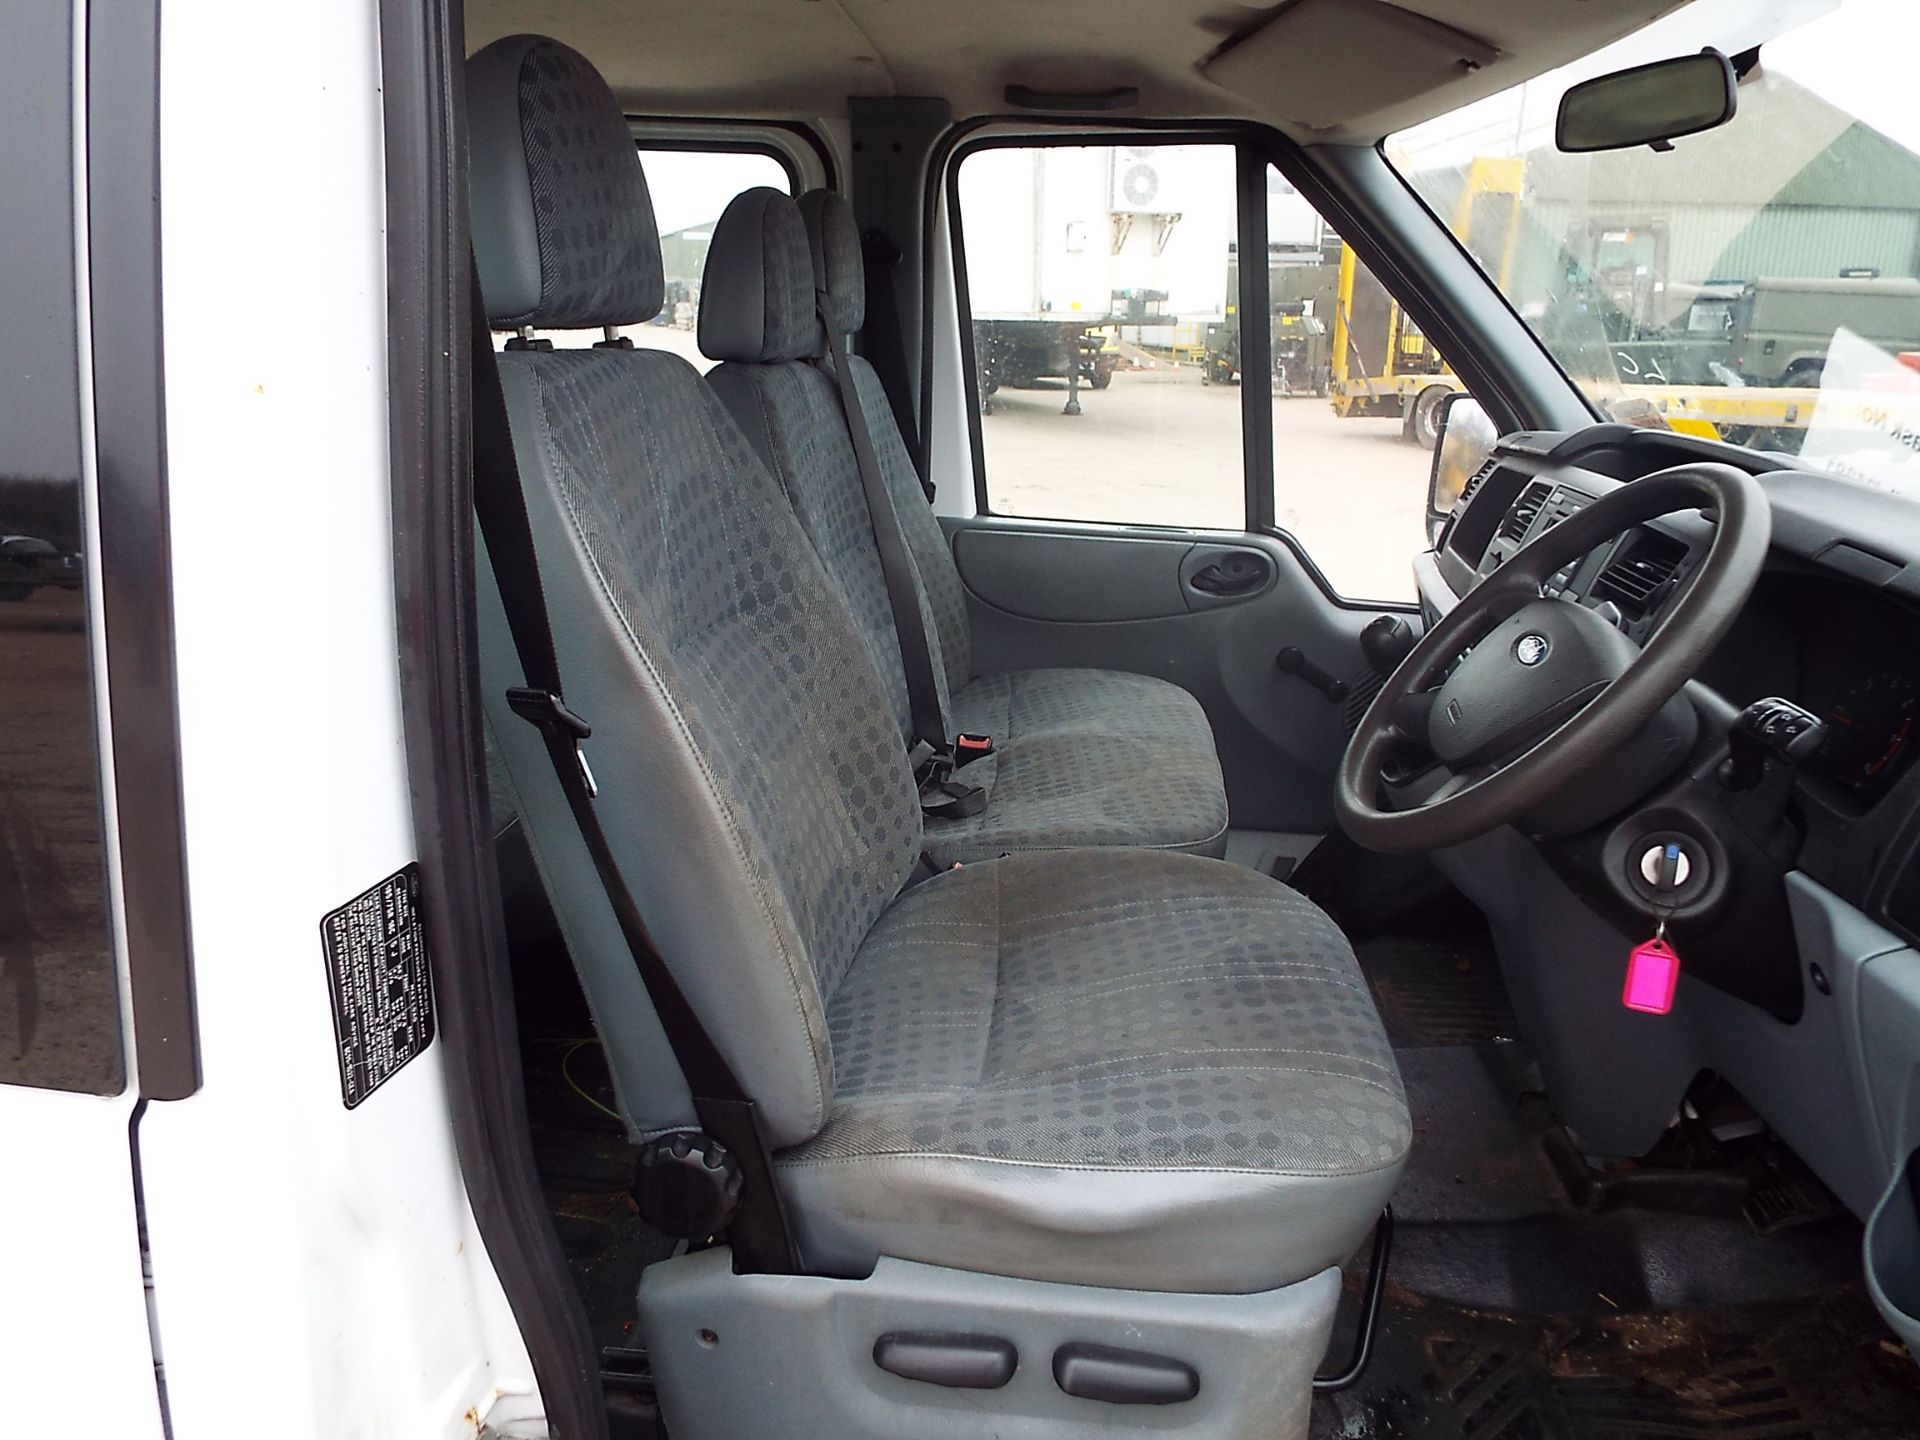 Ford Transit 115 T350L Double Cab Flat Bed Tipper - Image 11 of 20